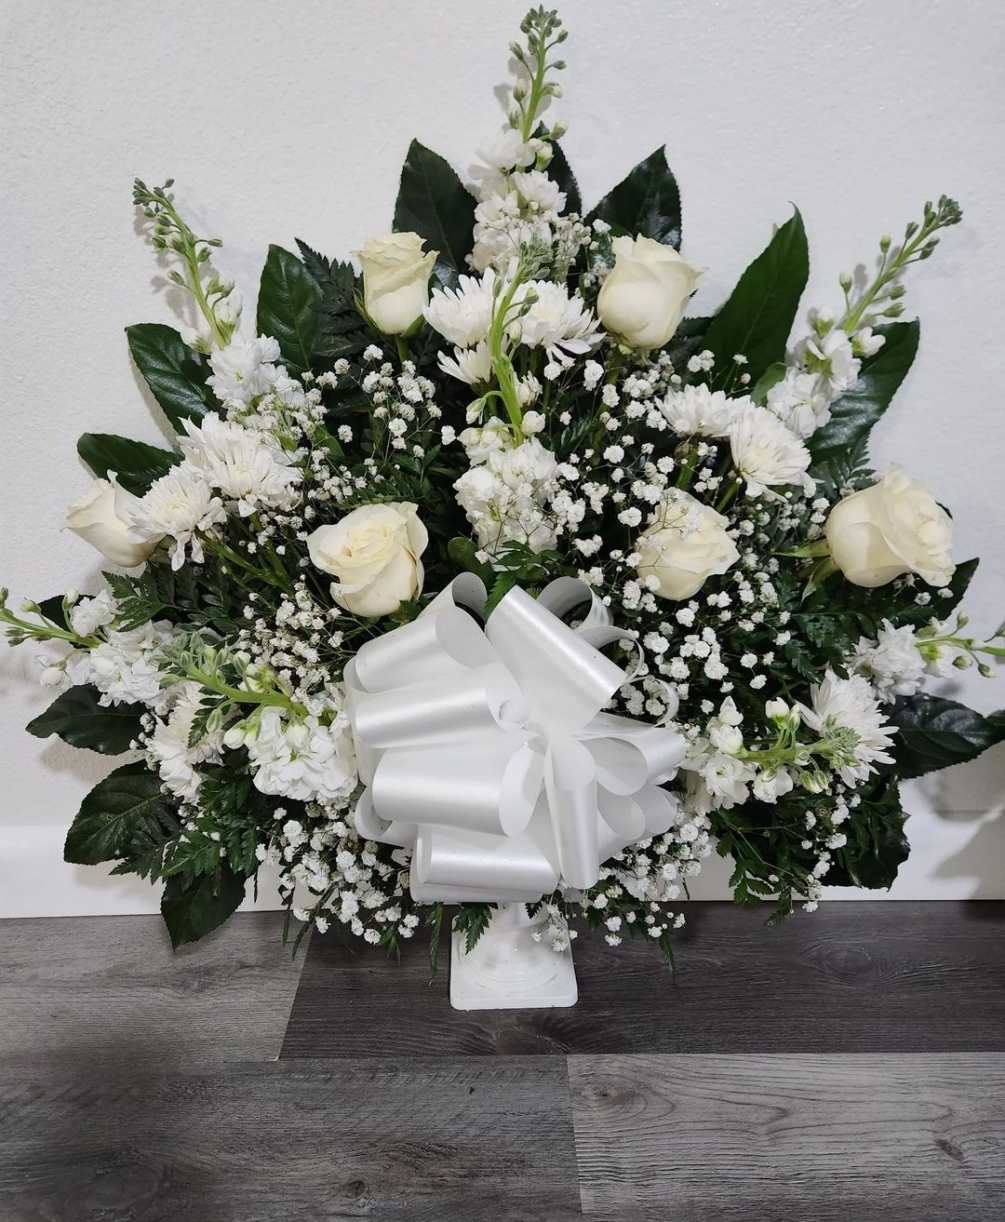 Send your deepest condolences to the family and friends with a basket